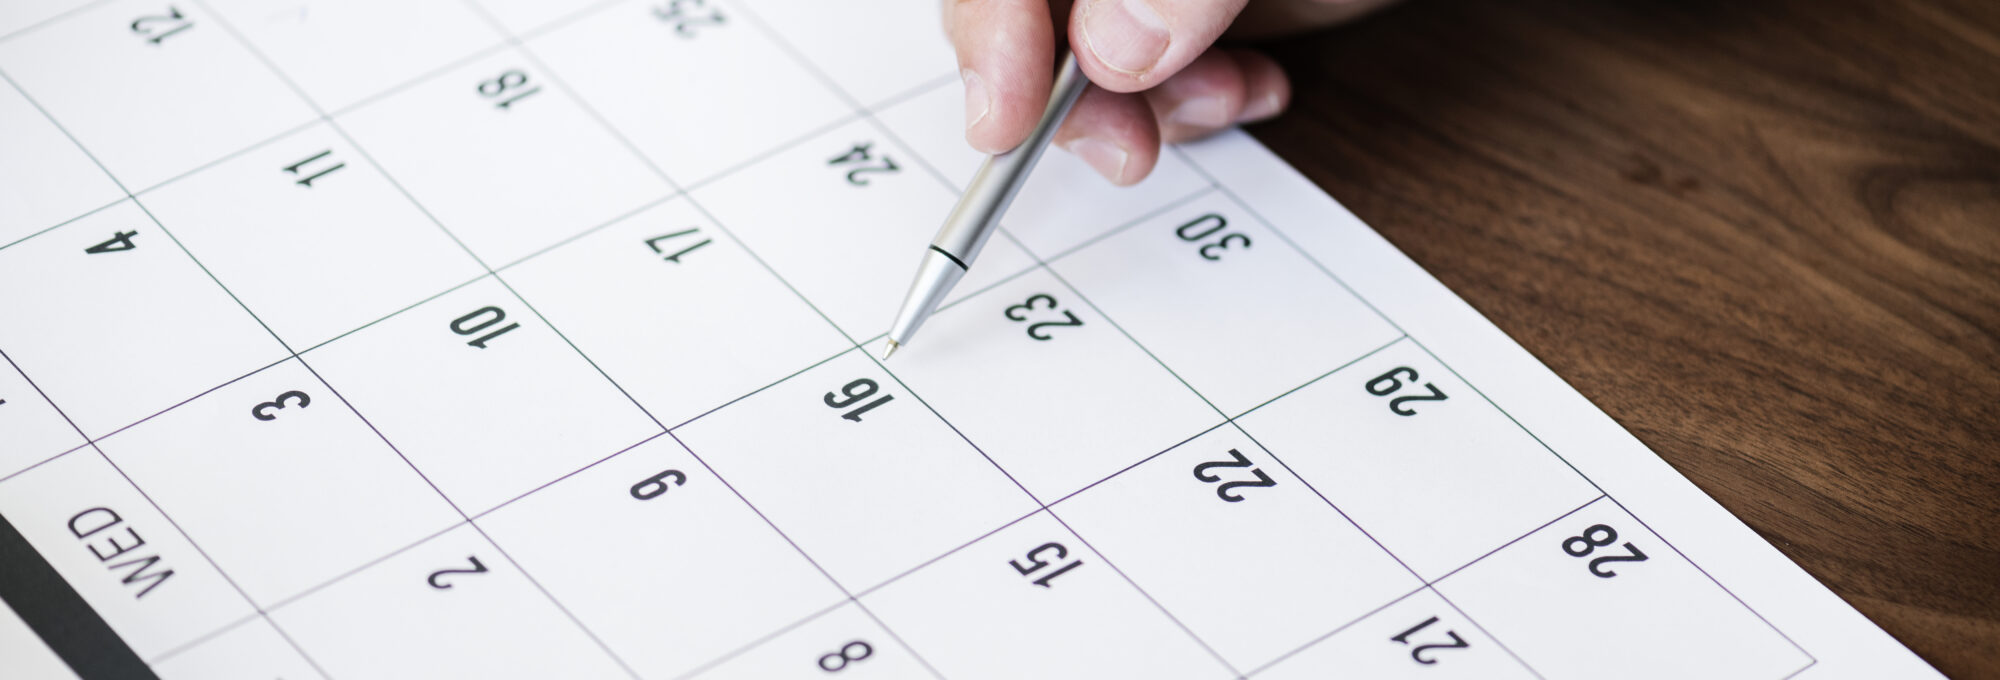 Businessman marking on calendar for an appointment